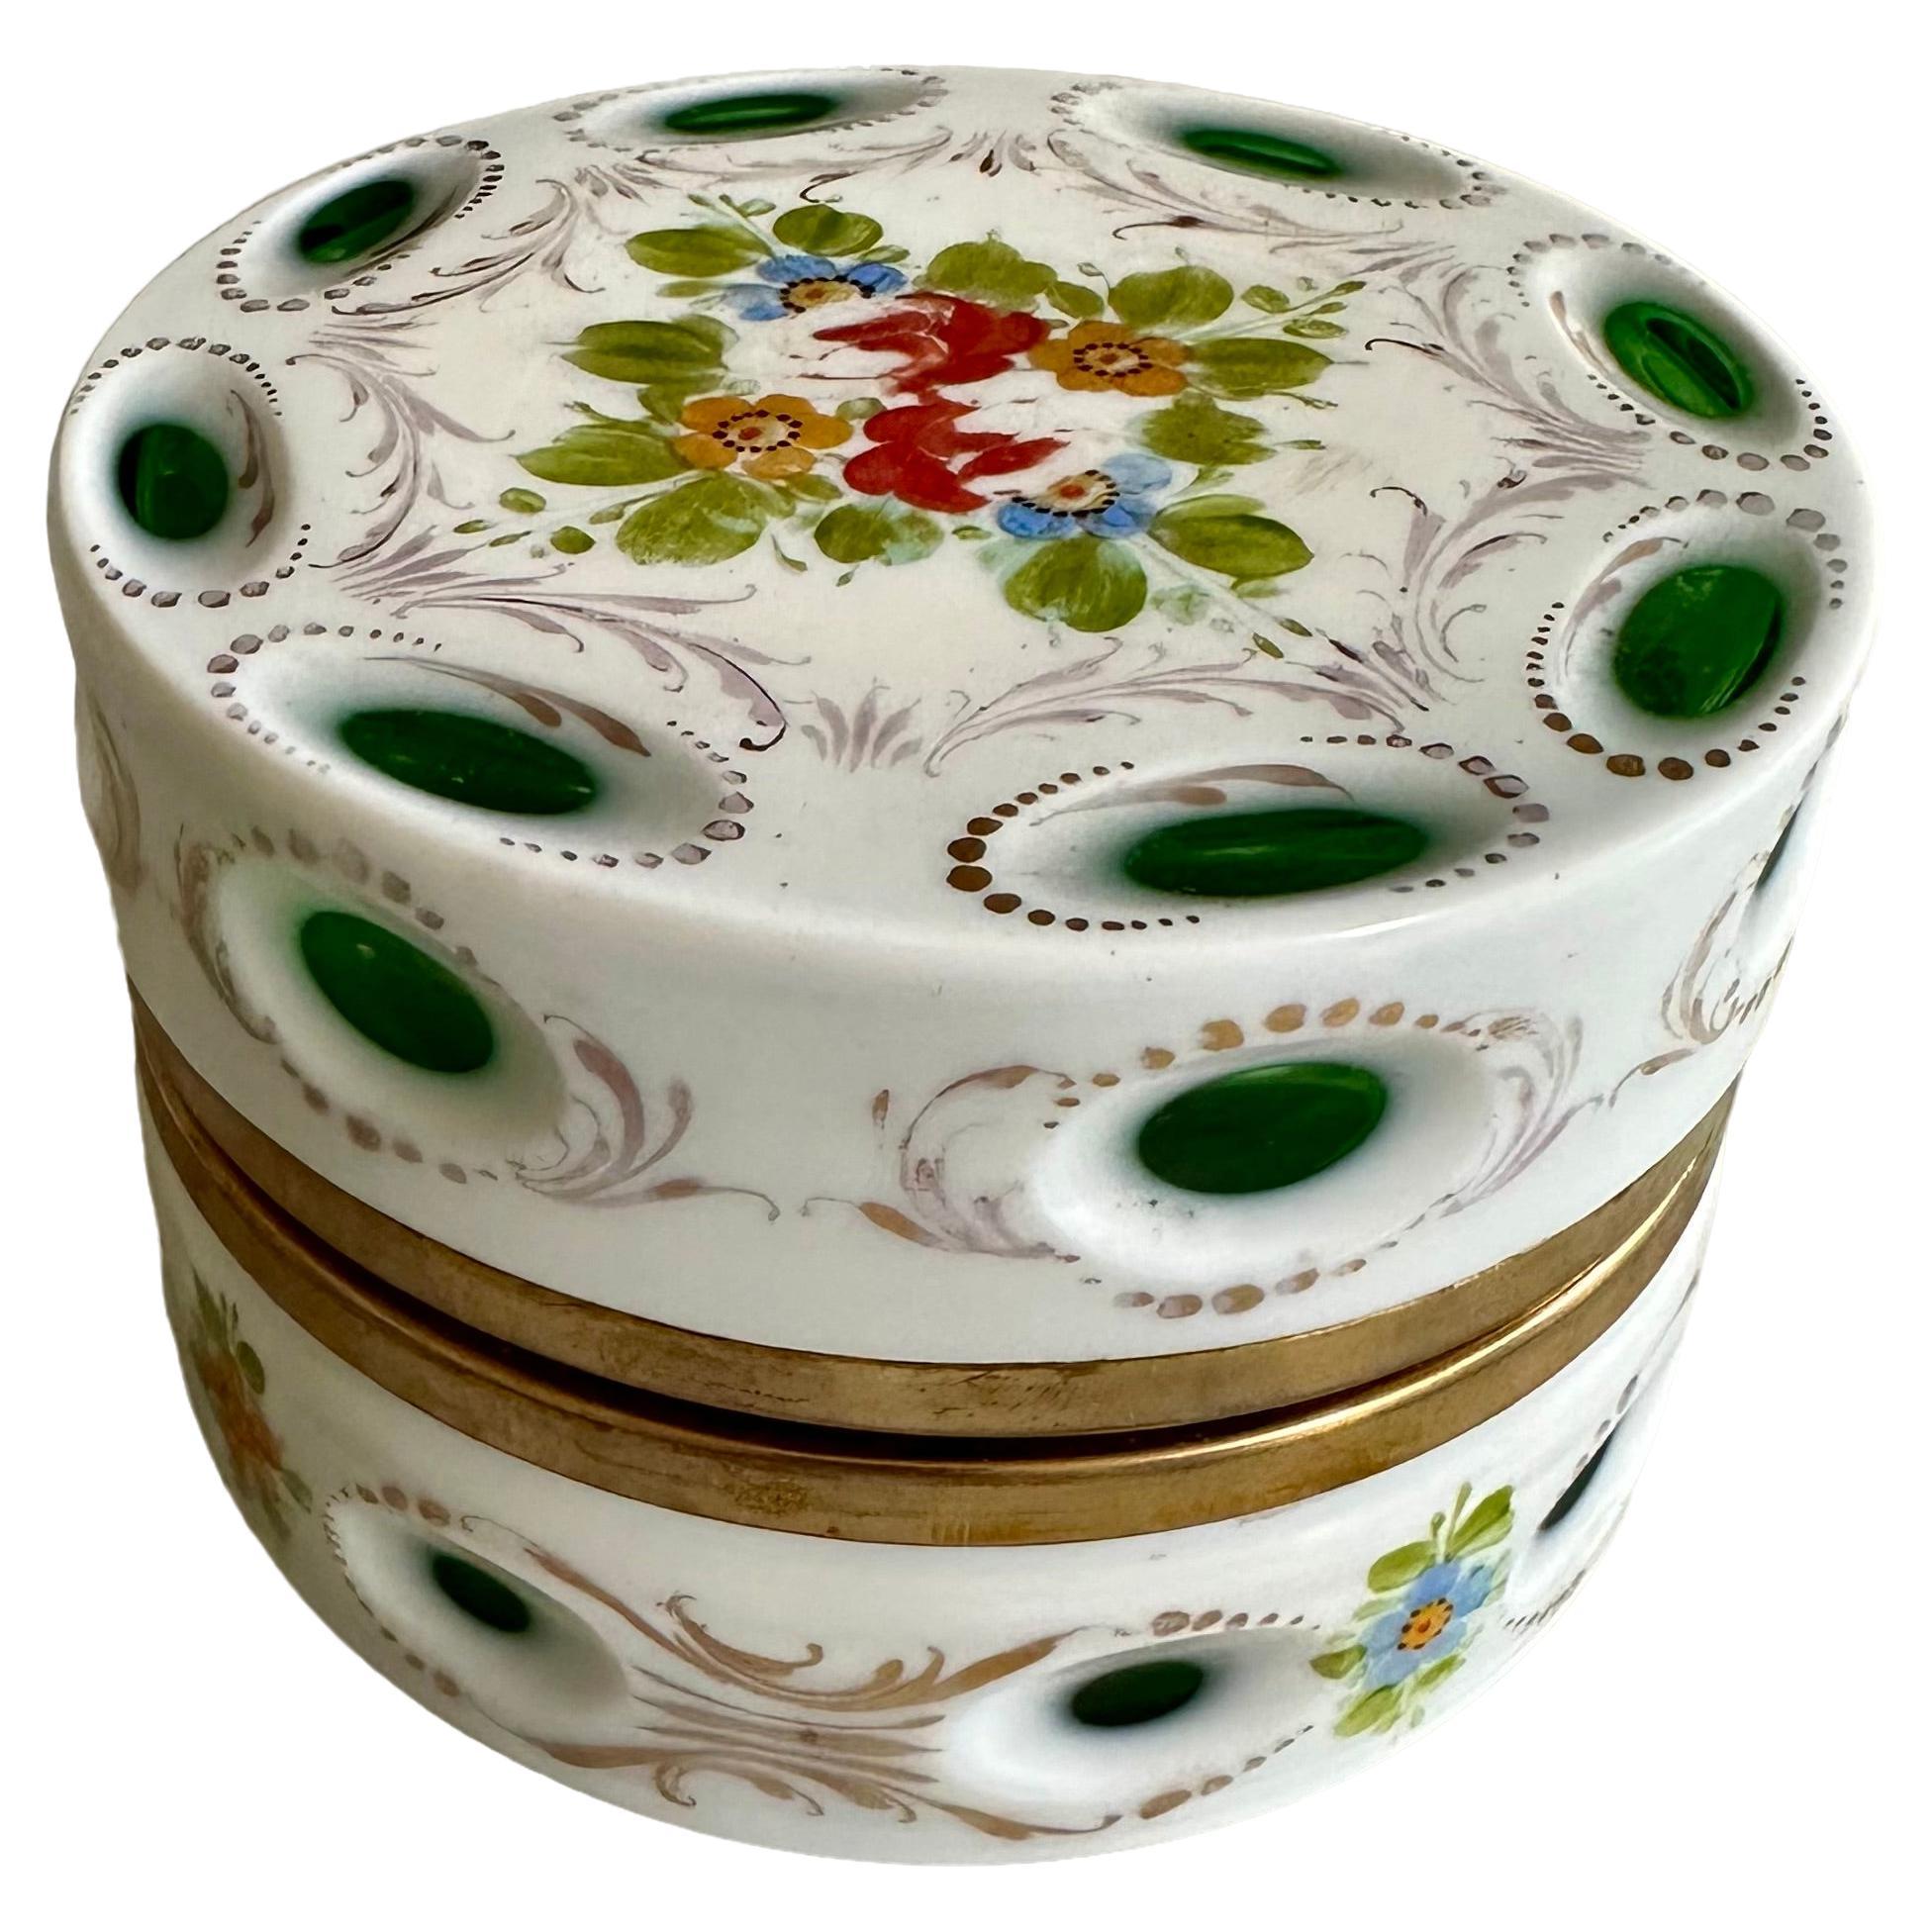 1890s Opaline Glass Lidded Box with Floral Ornament, white an green